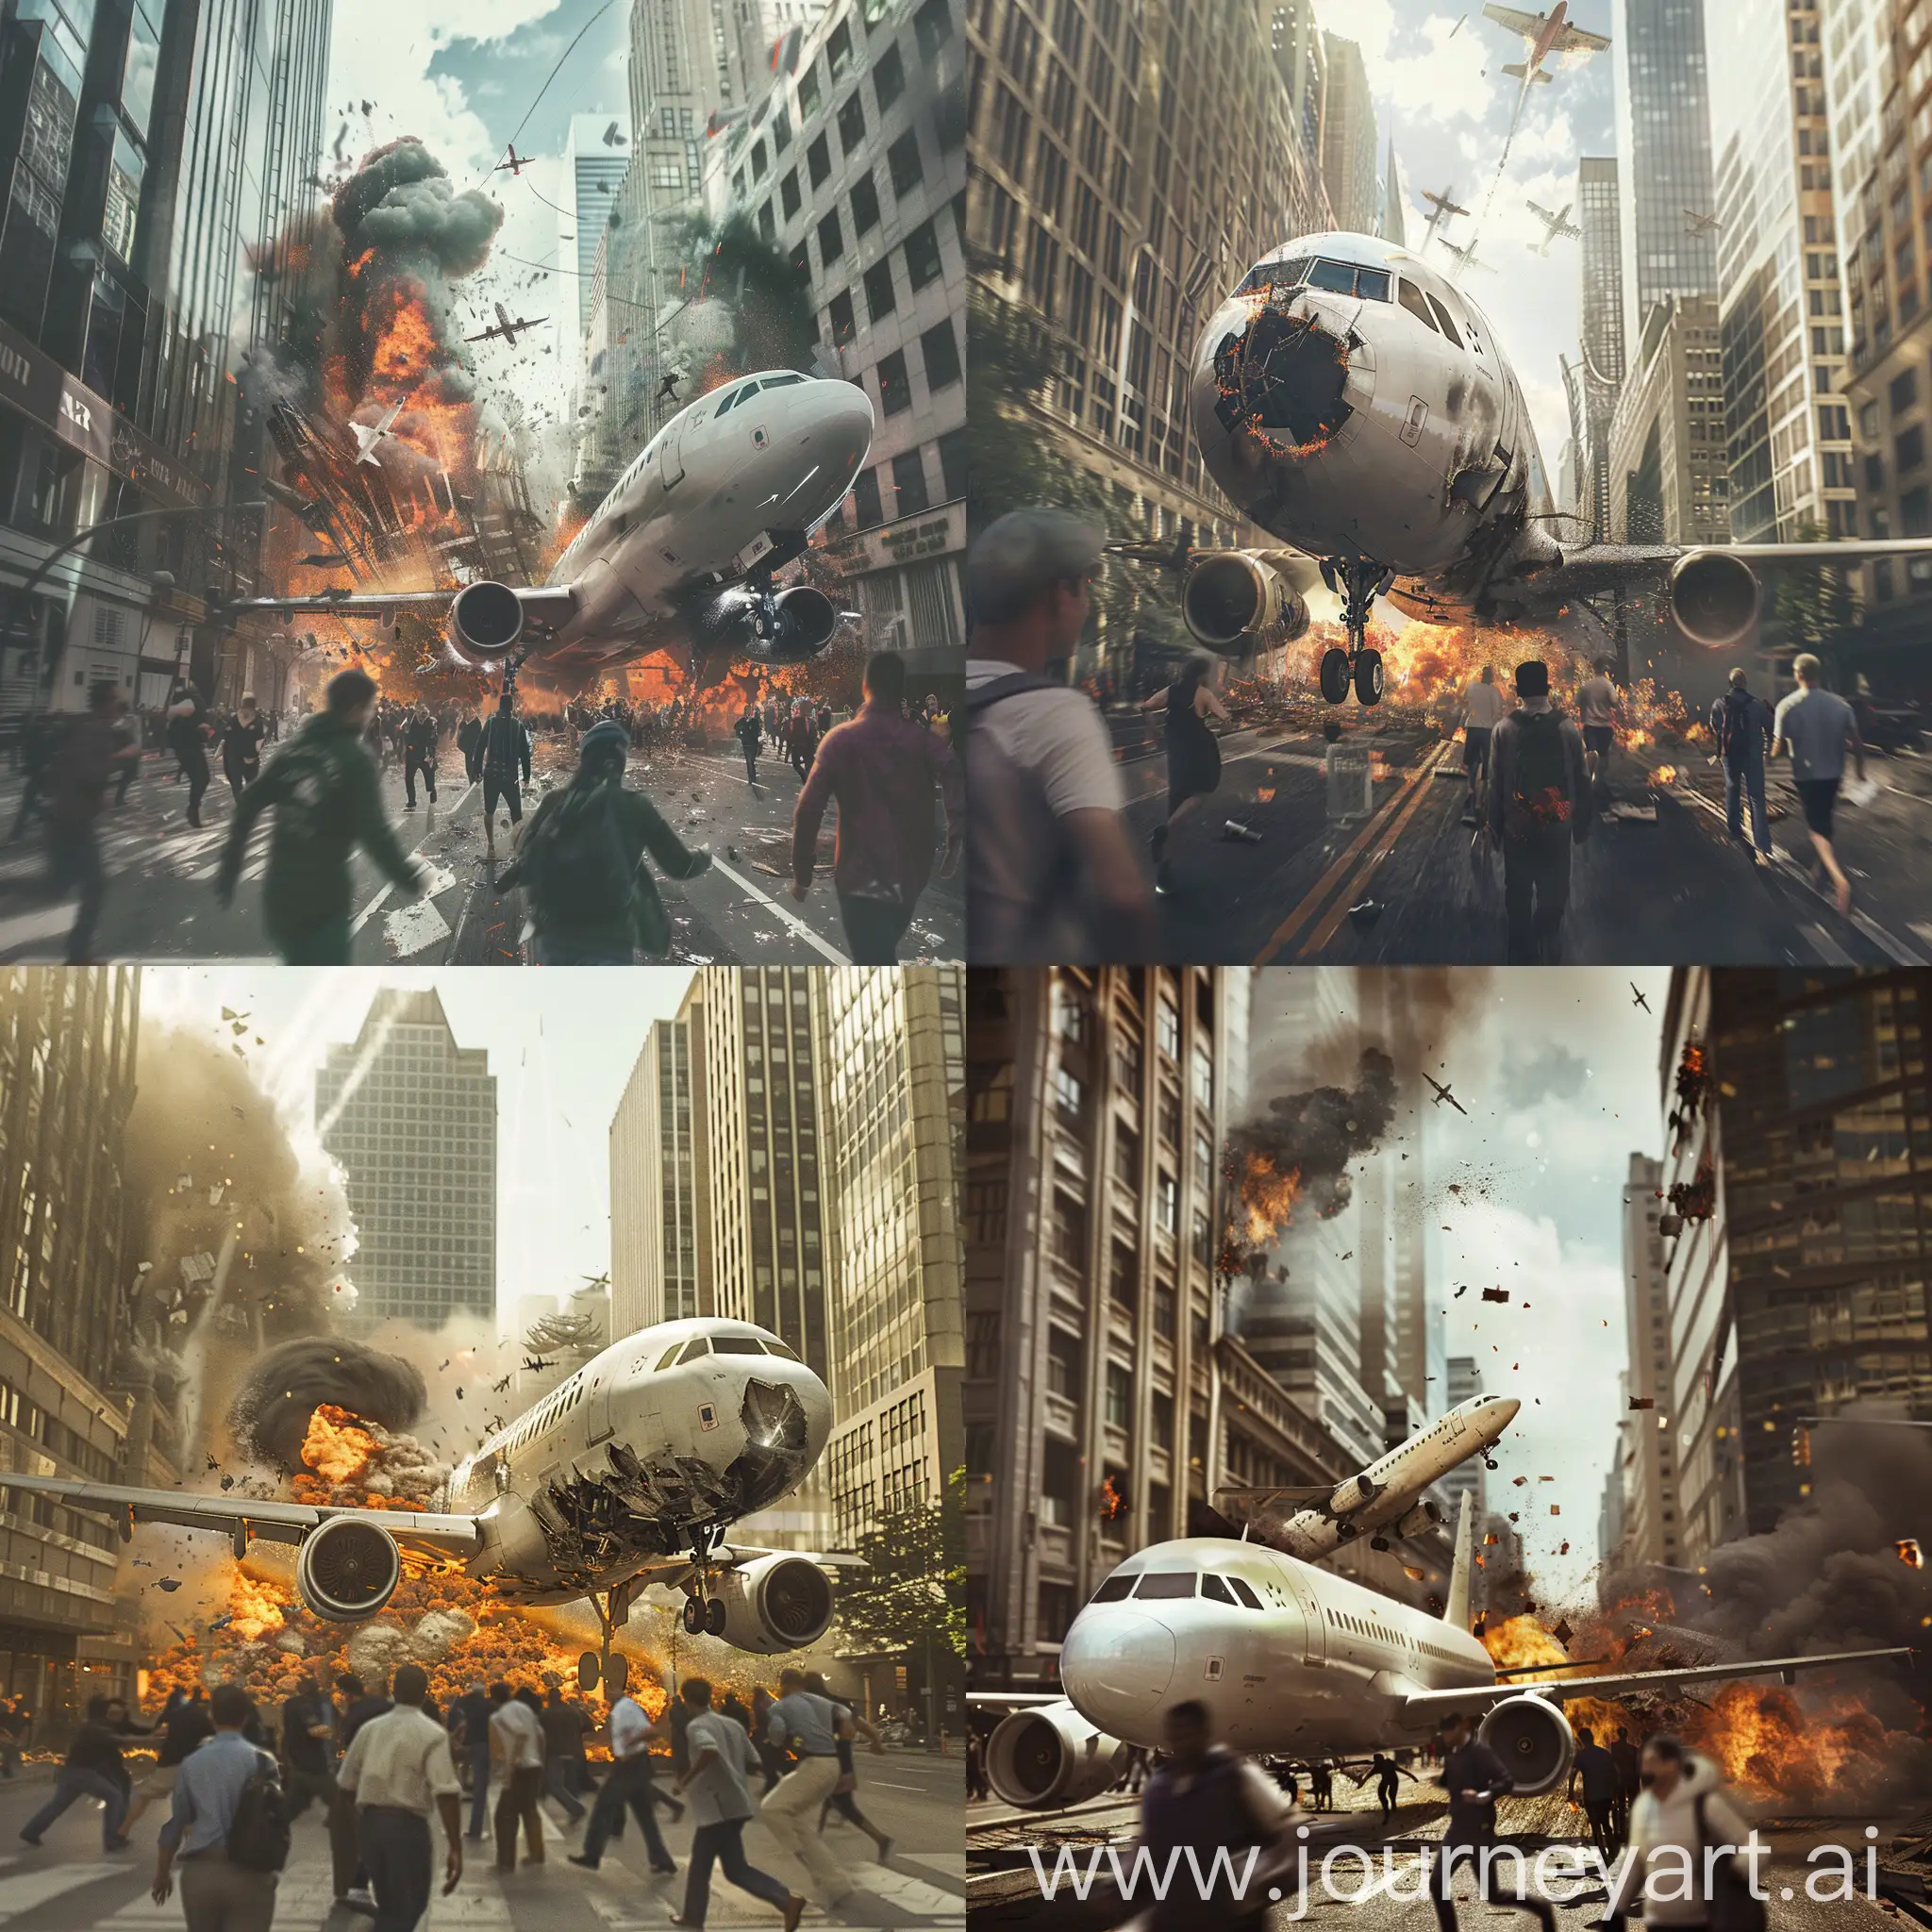 Urban-Chaos-Airplane-Crash-and-Explosions-Amidst-Fleeing-Crowds